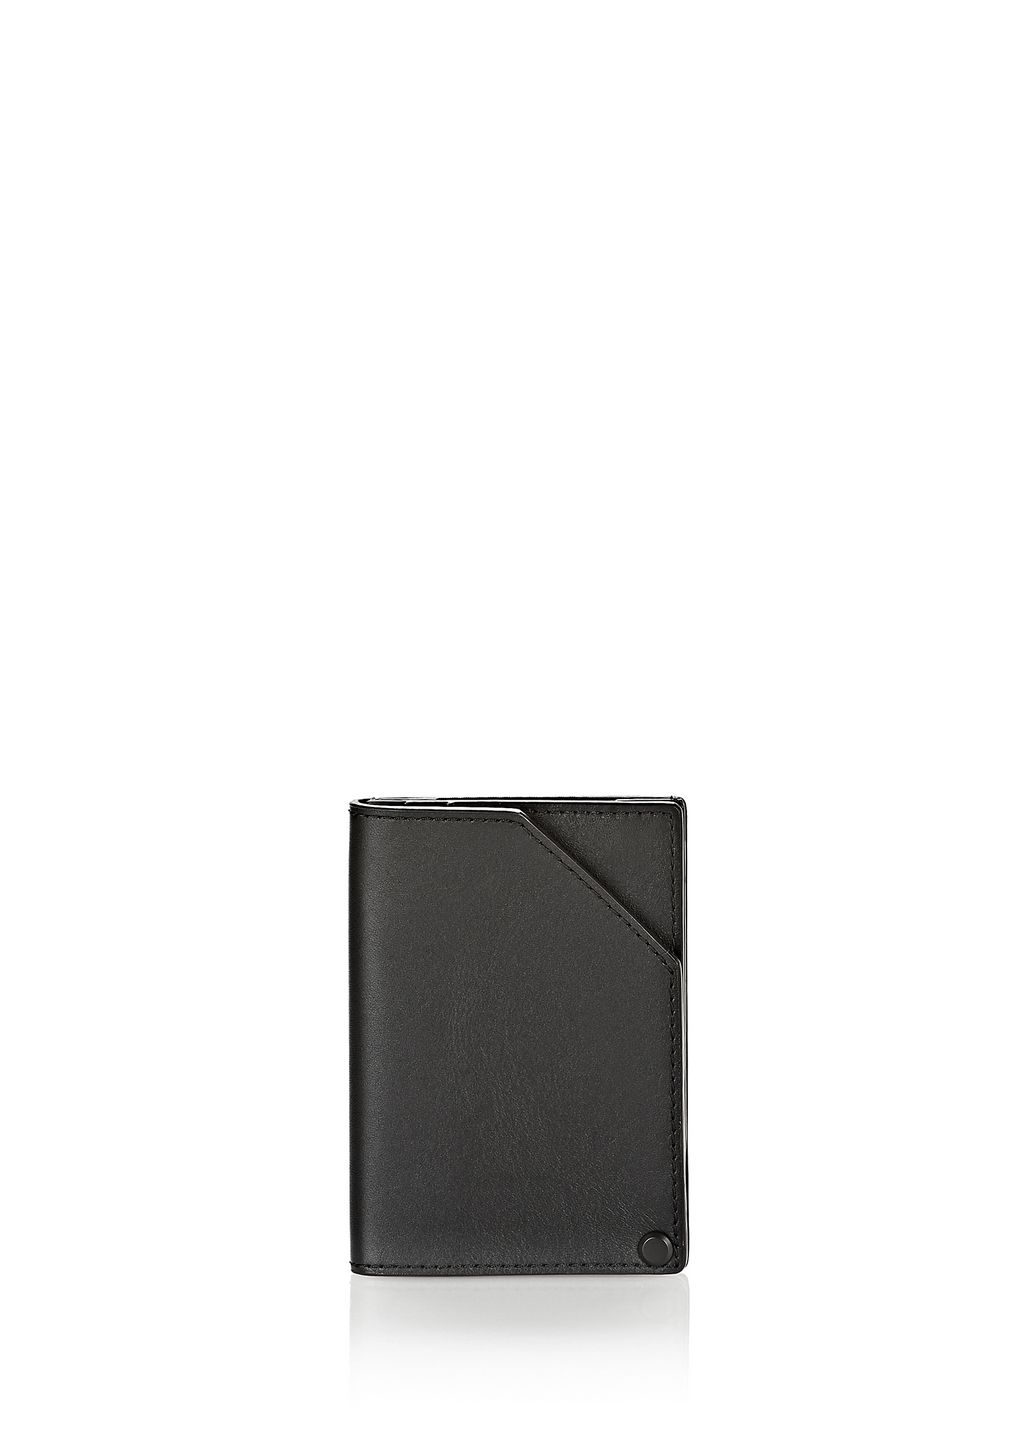 Alexander Wang ‎HINGED WALLET IN SMOOTH BLACK ‎ ‎Wallet‎ |Official Site